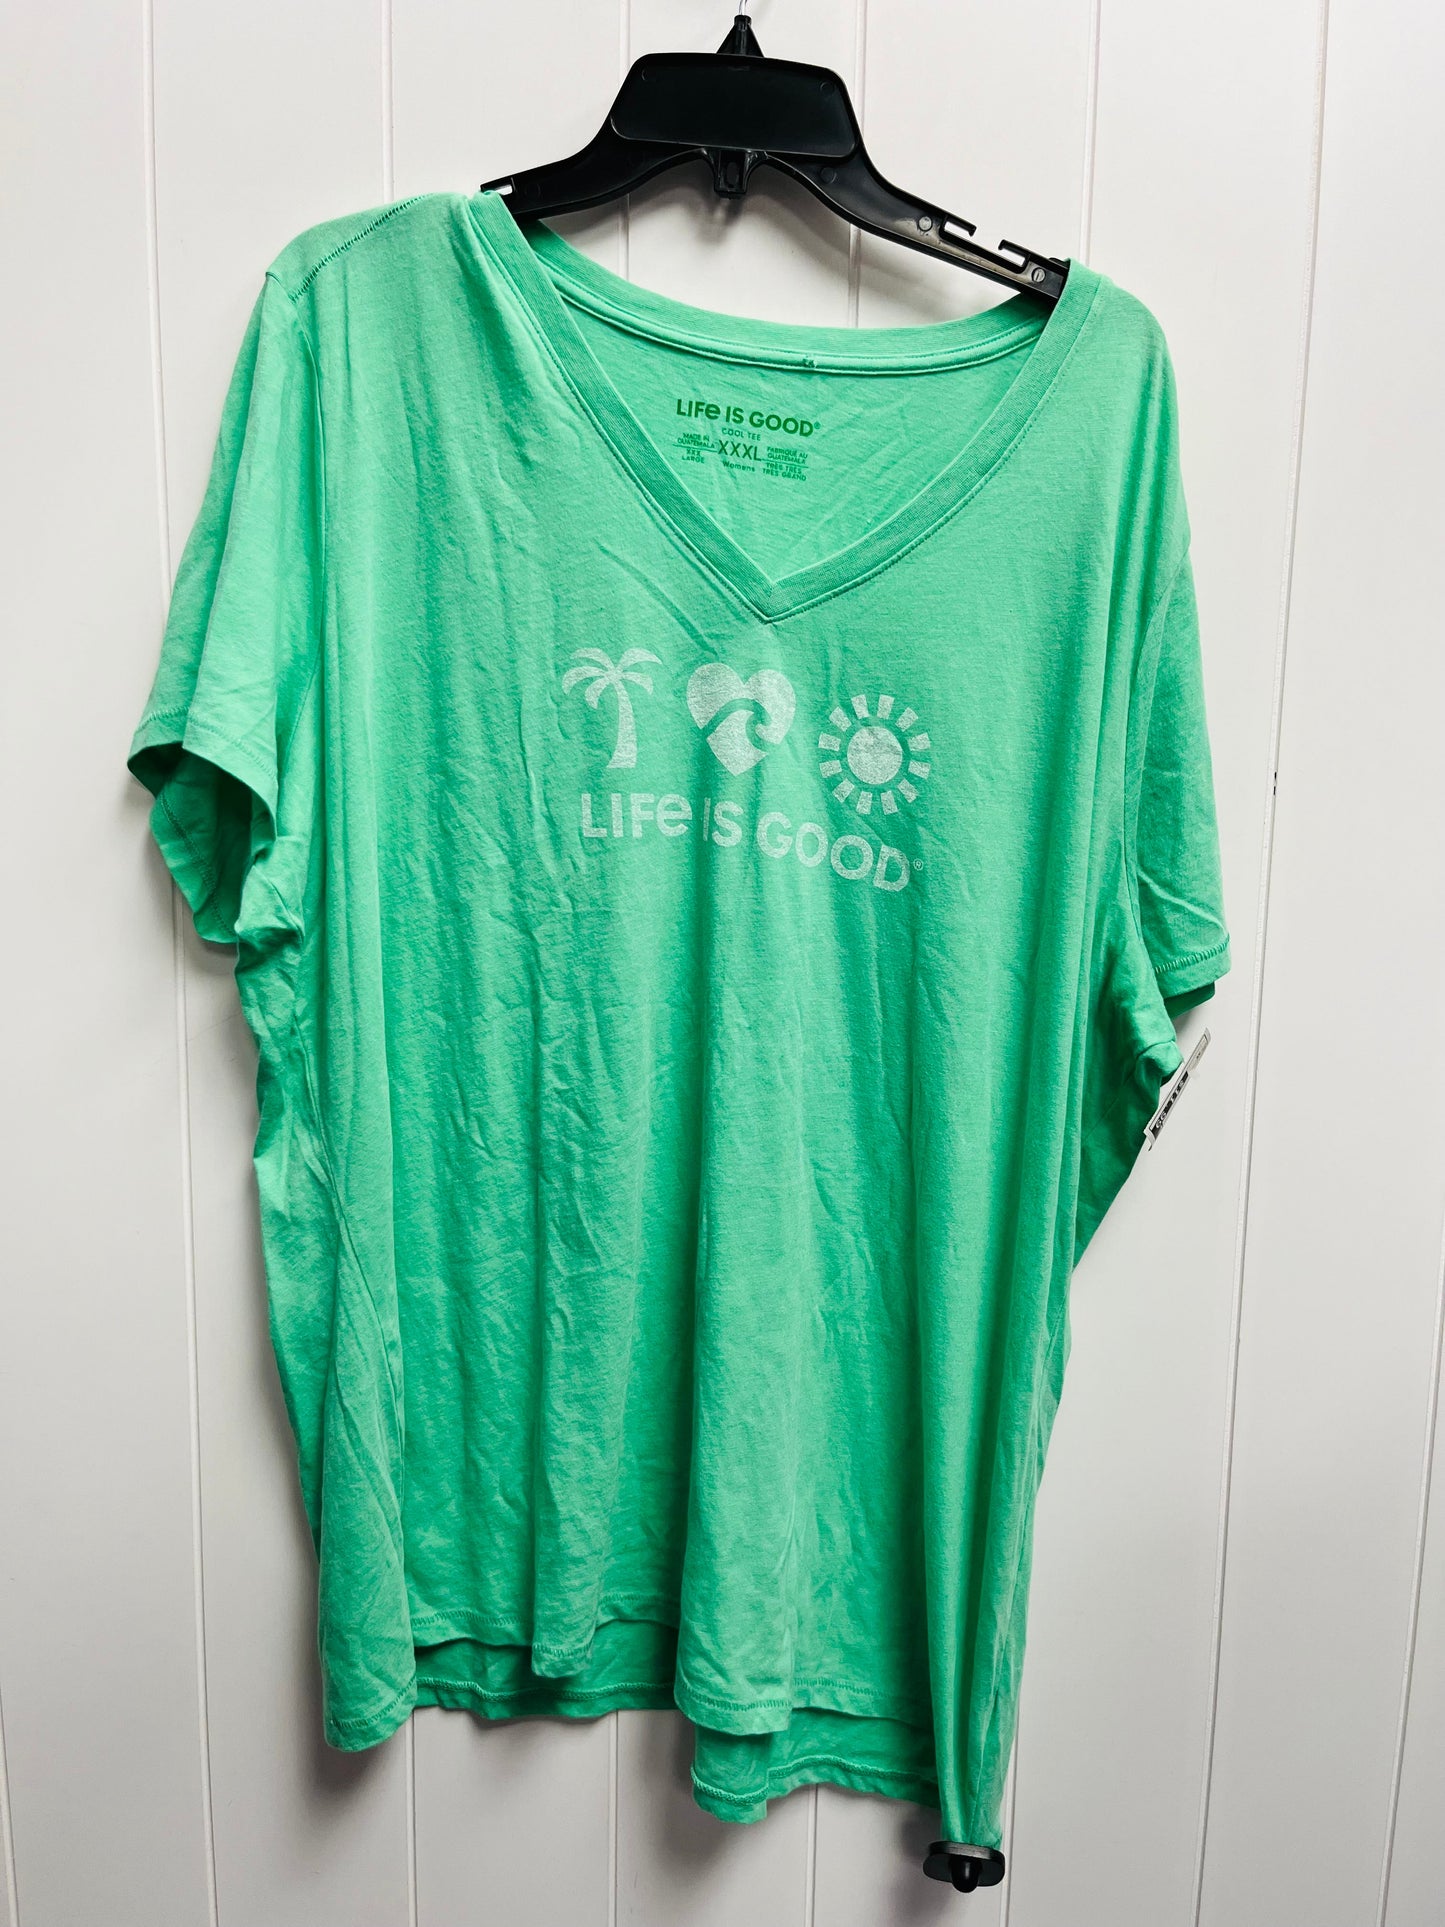 Green Top Short Sleeve Life Is Good, Size 3x